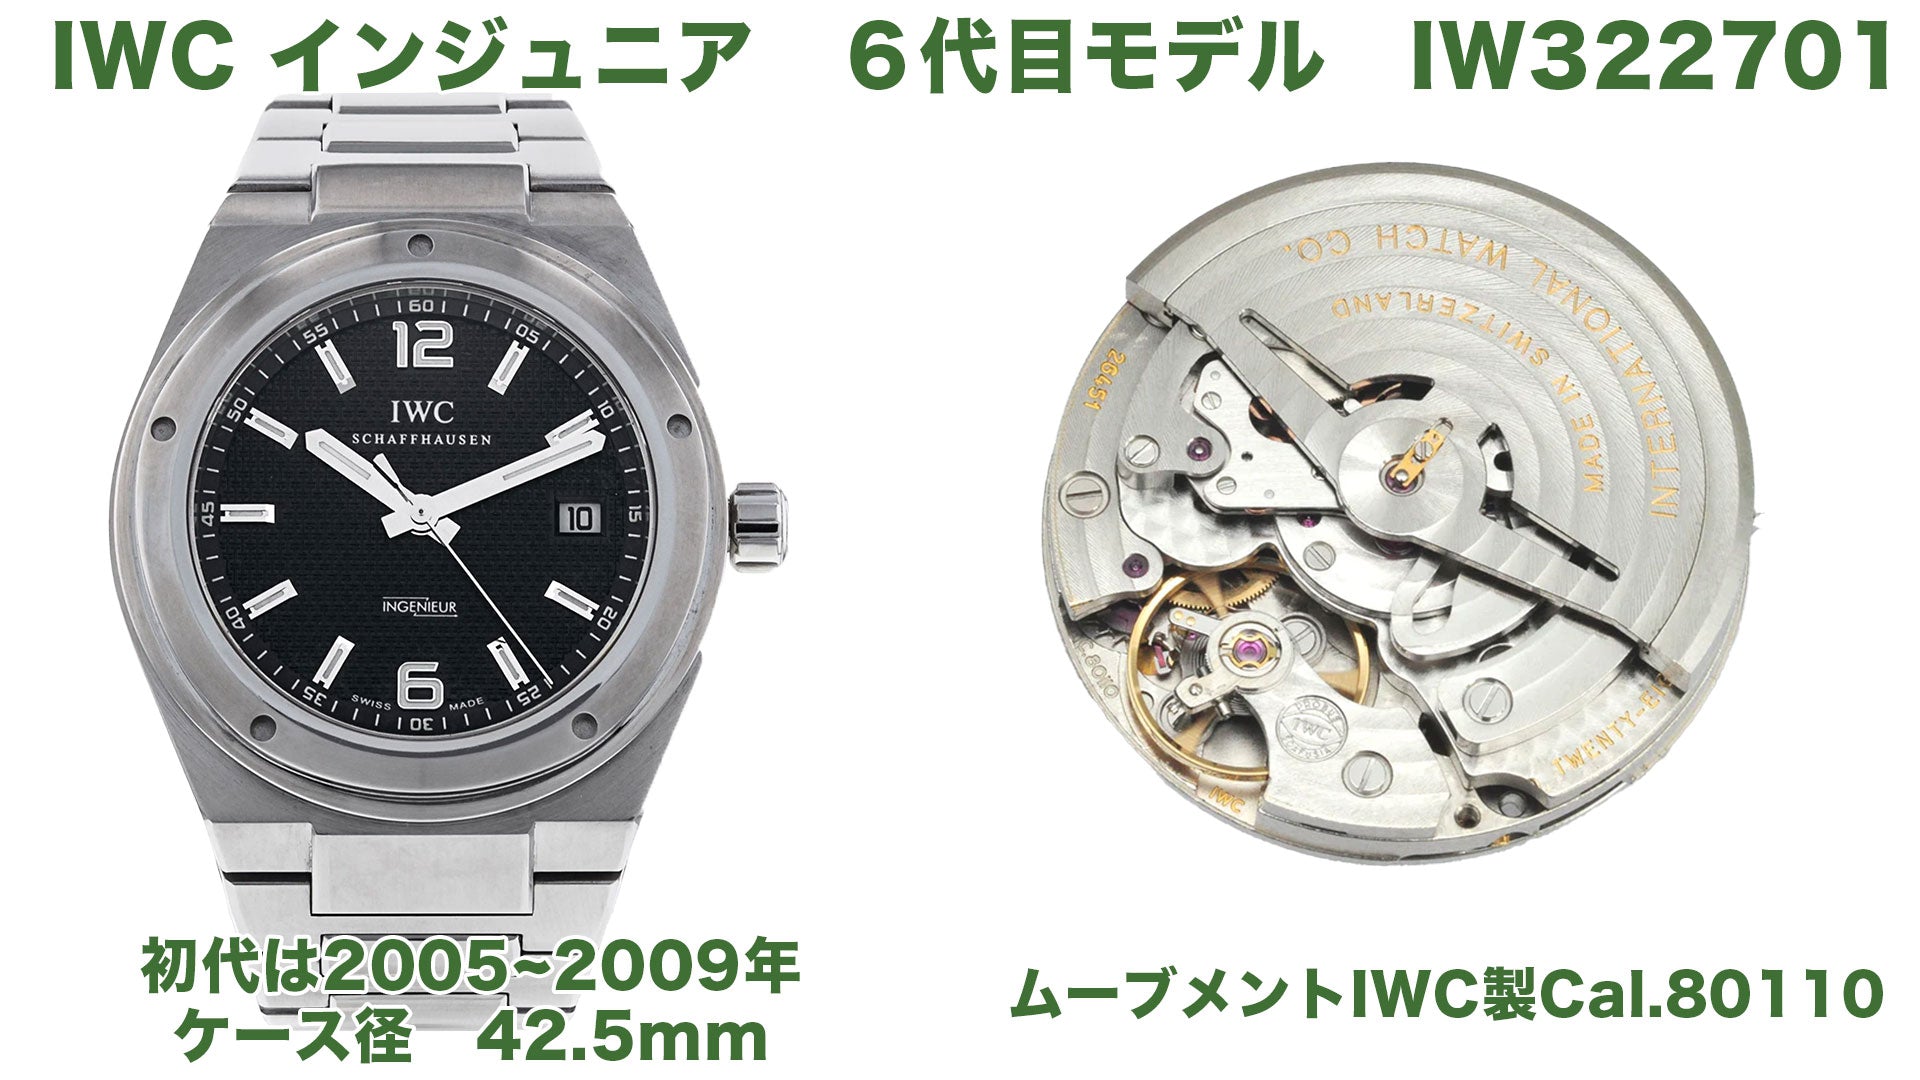 IWC Ingenieur 6th generation model IW322701 and Cal.80110